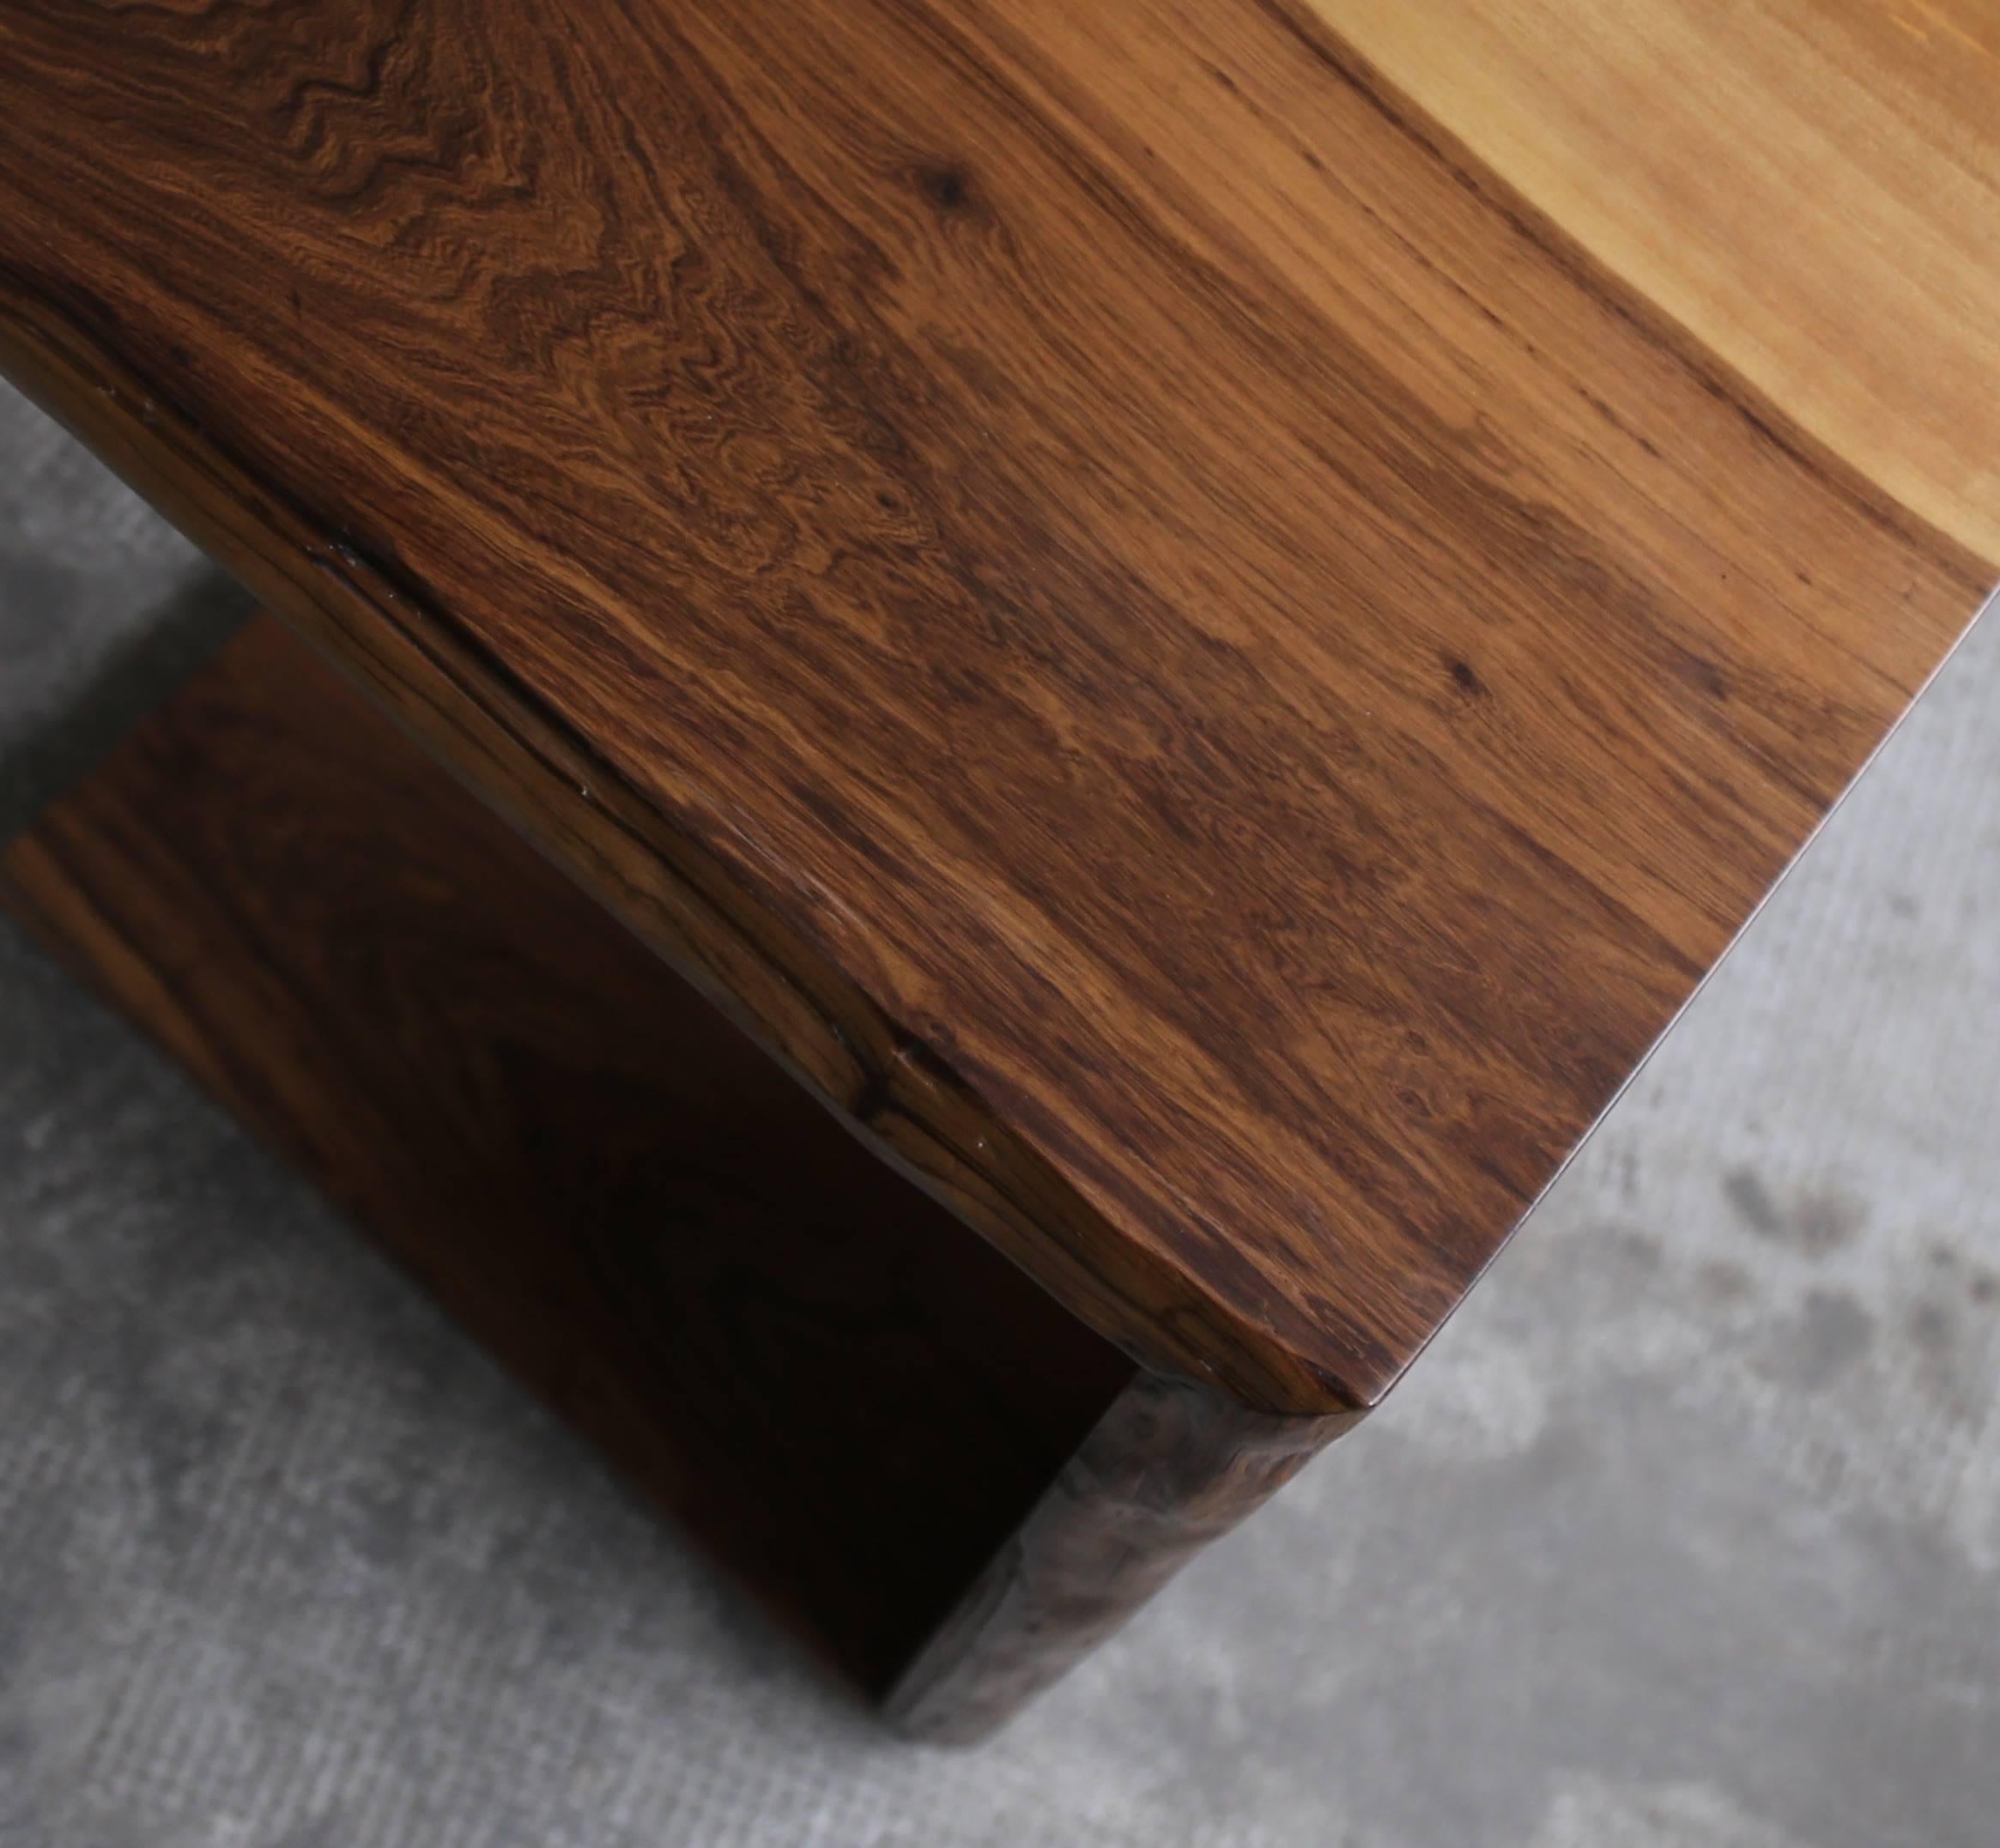 Carlo Custom Live-Edge Occasional Table in Argentine Rosewood from Costantini

Measurements are 20